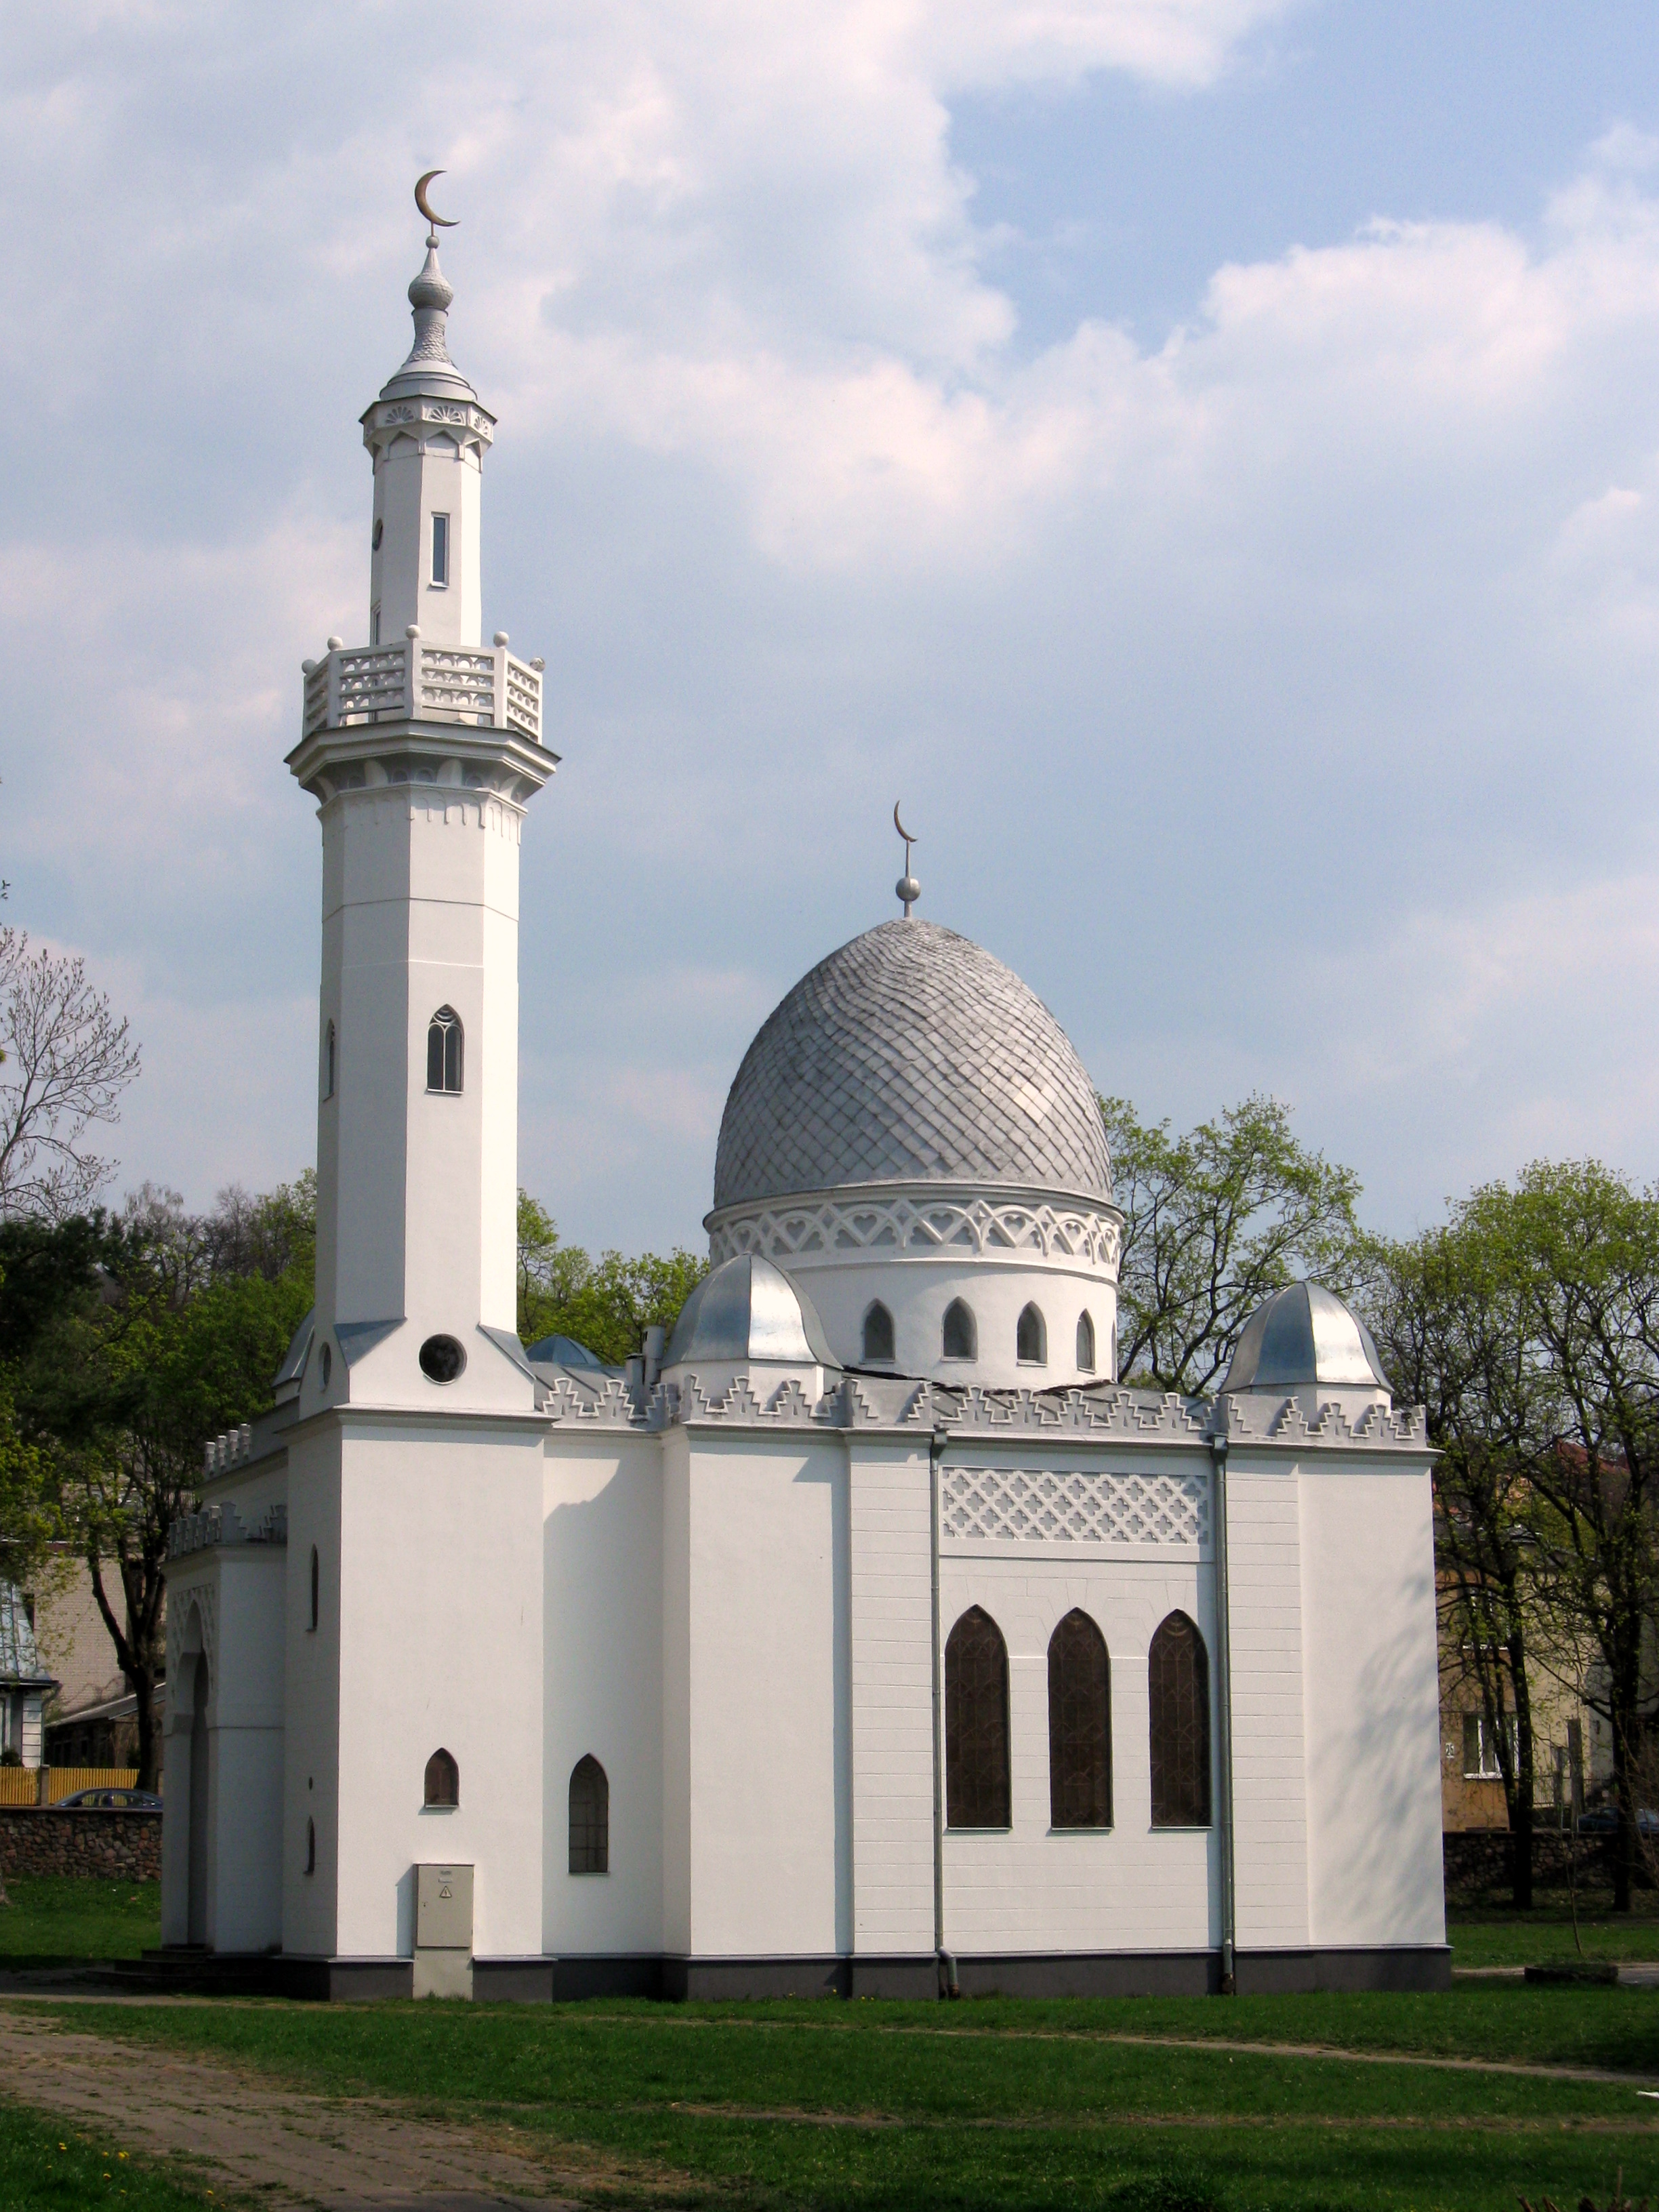 The Little Mosque in the Park  Amanda in Lithuania